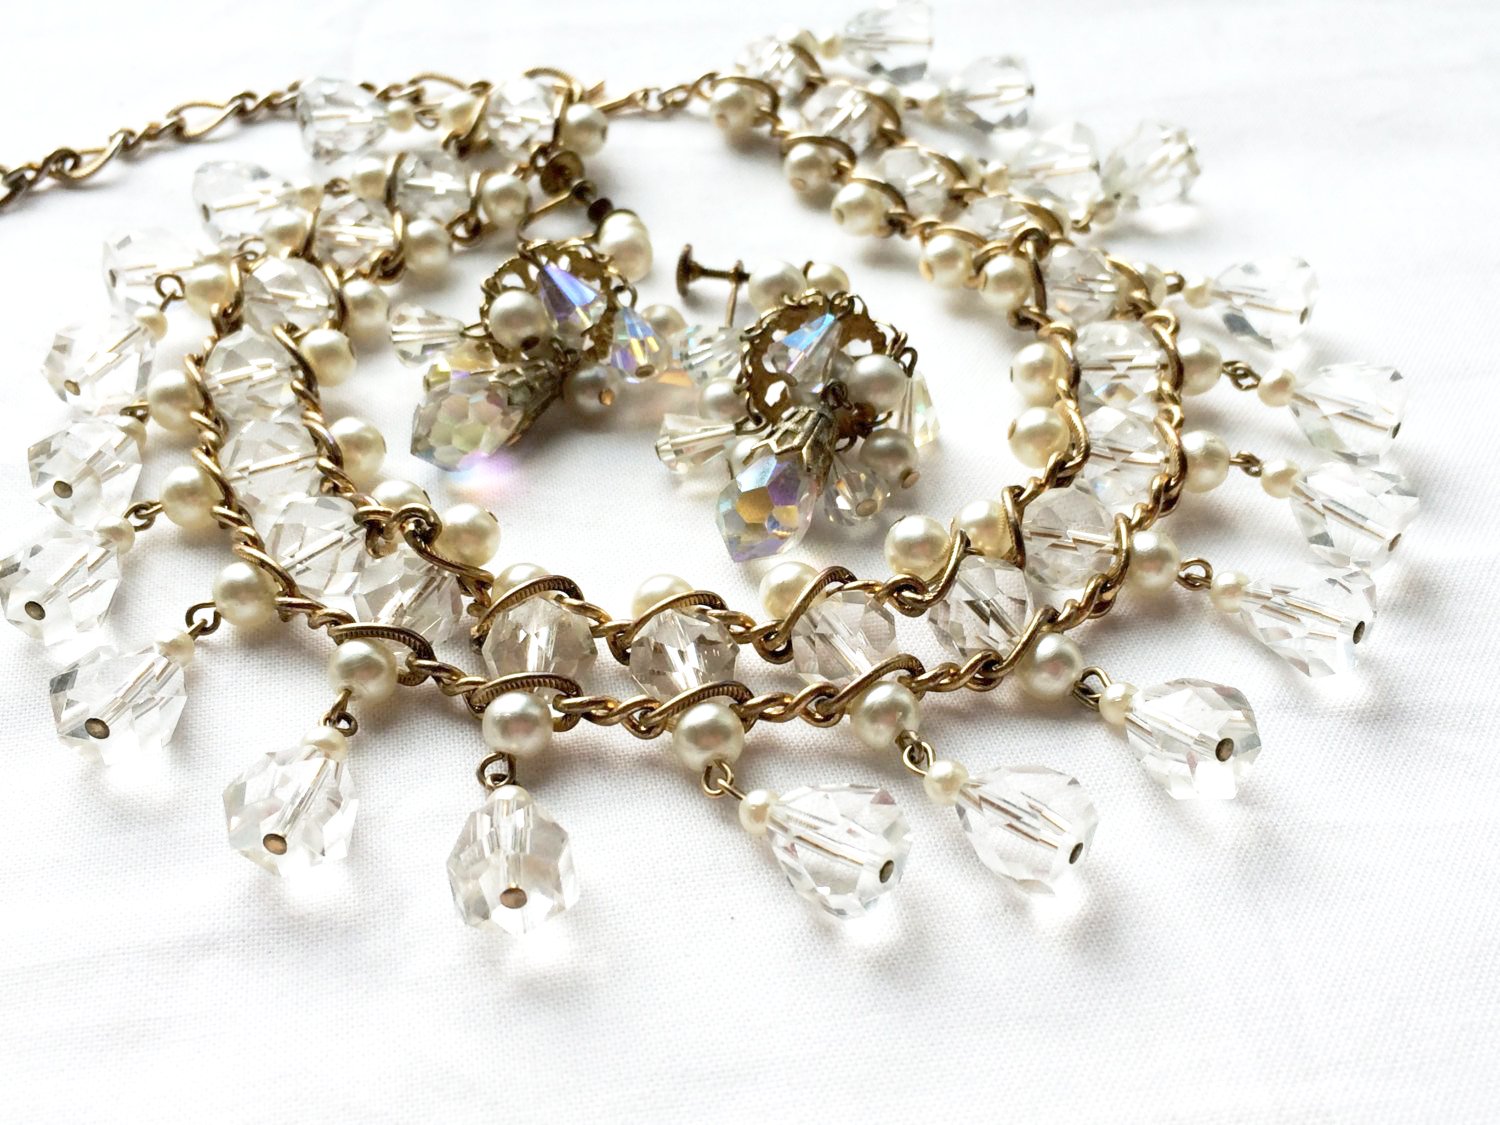 Darling Demi Parure Pearl and Crystals Vintage Jewelry Set